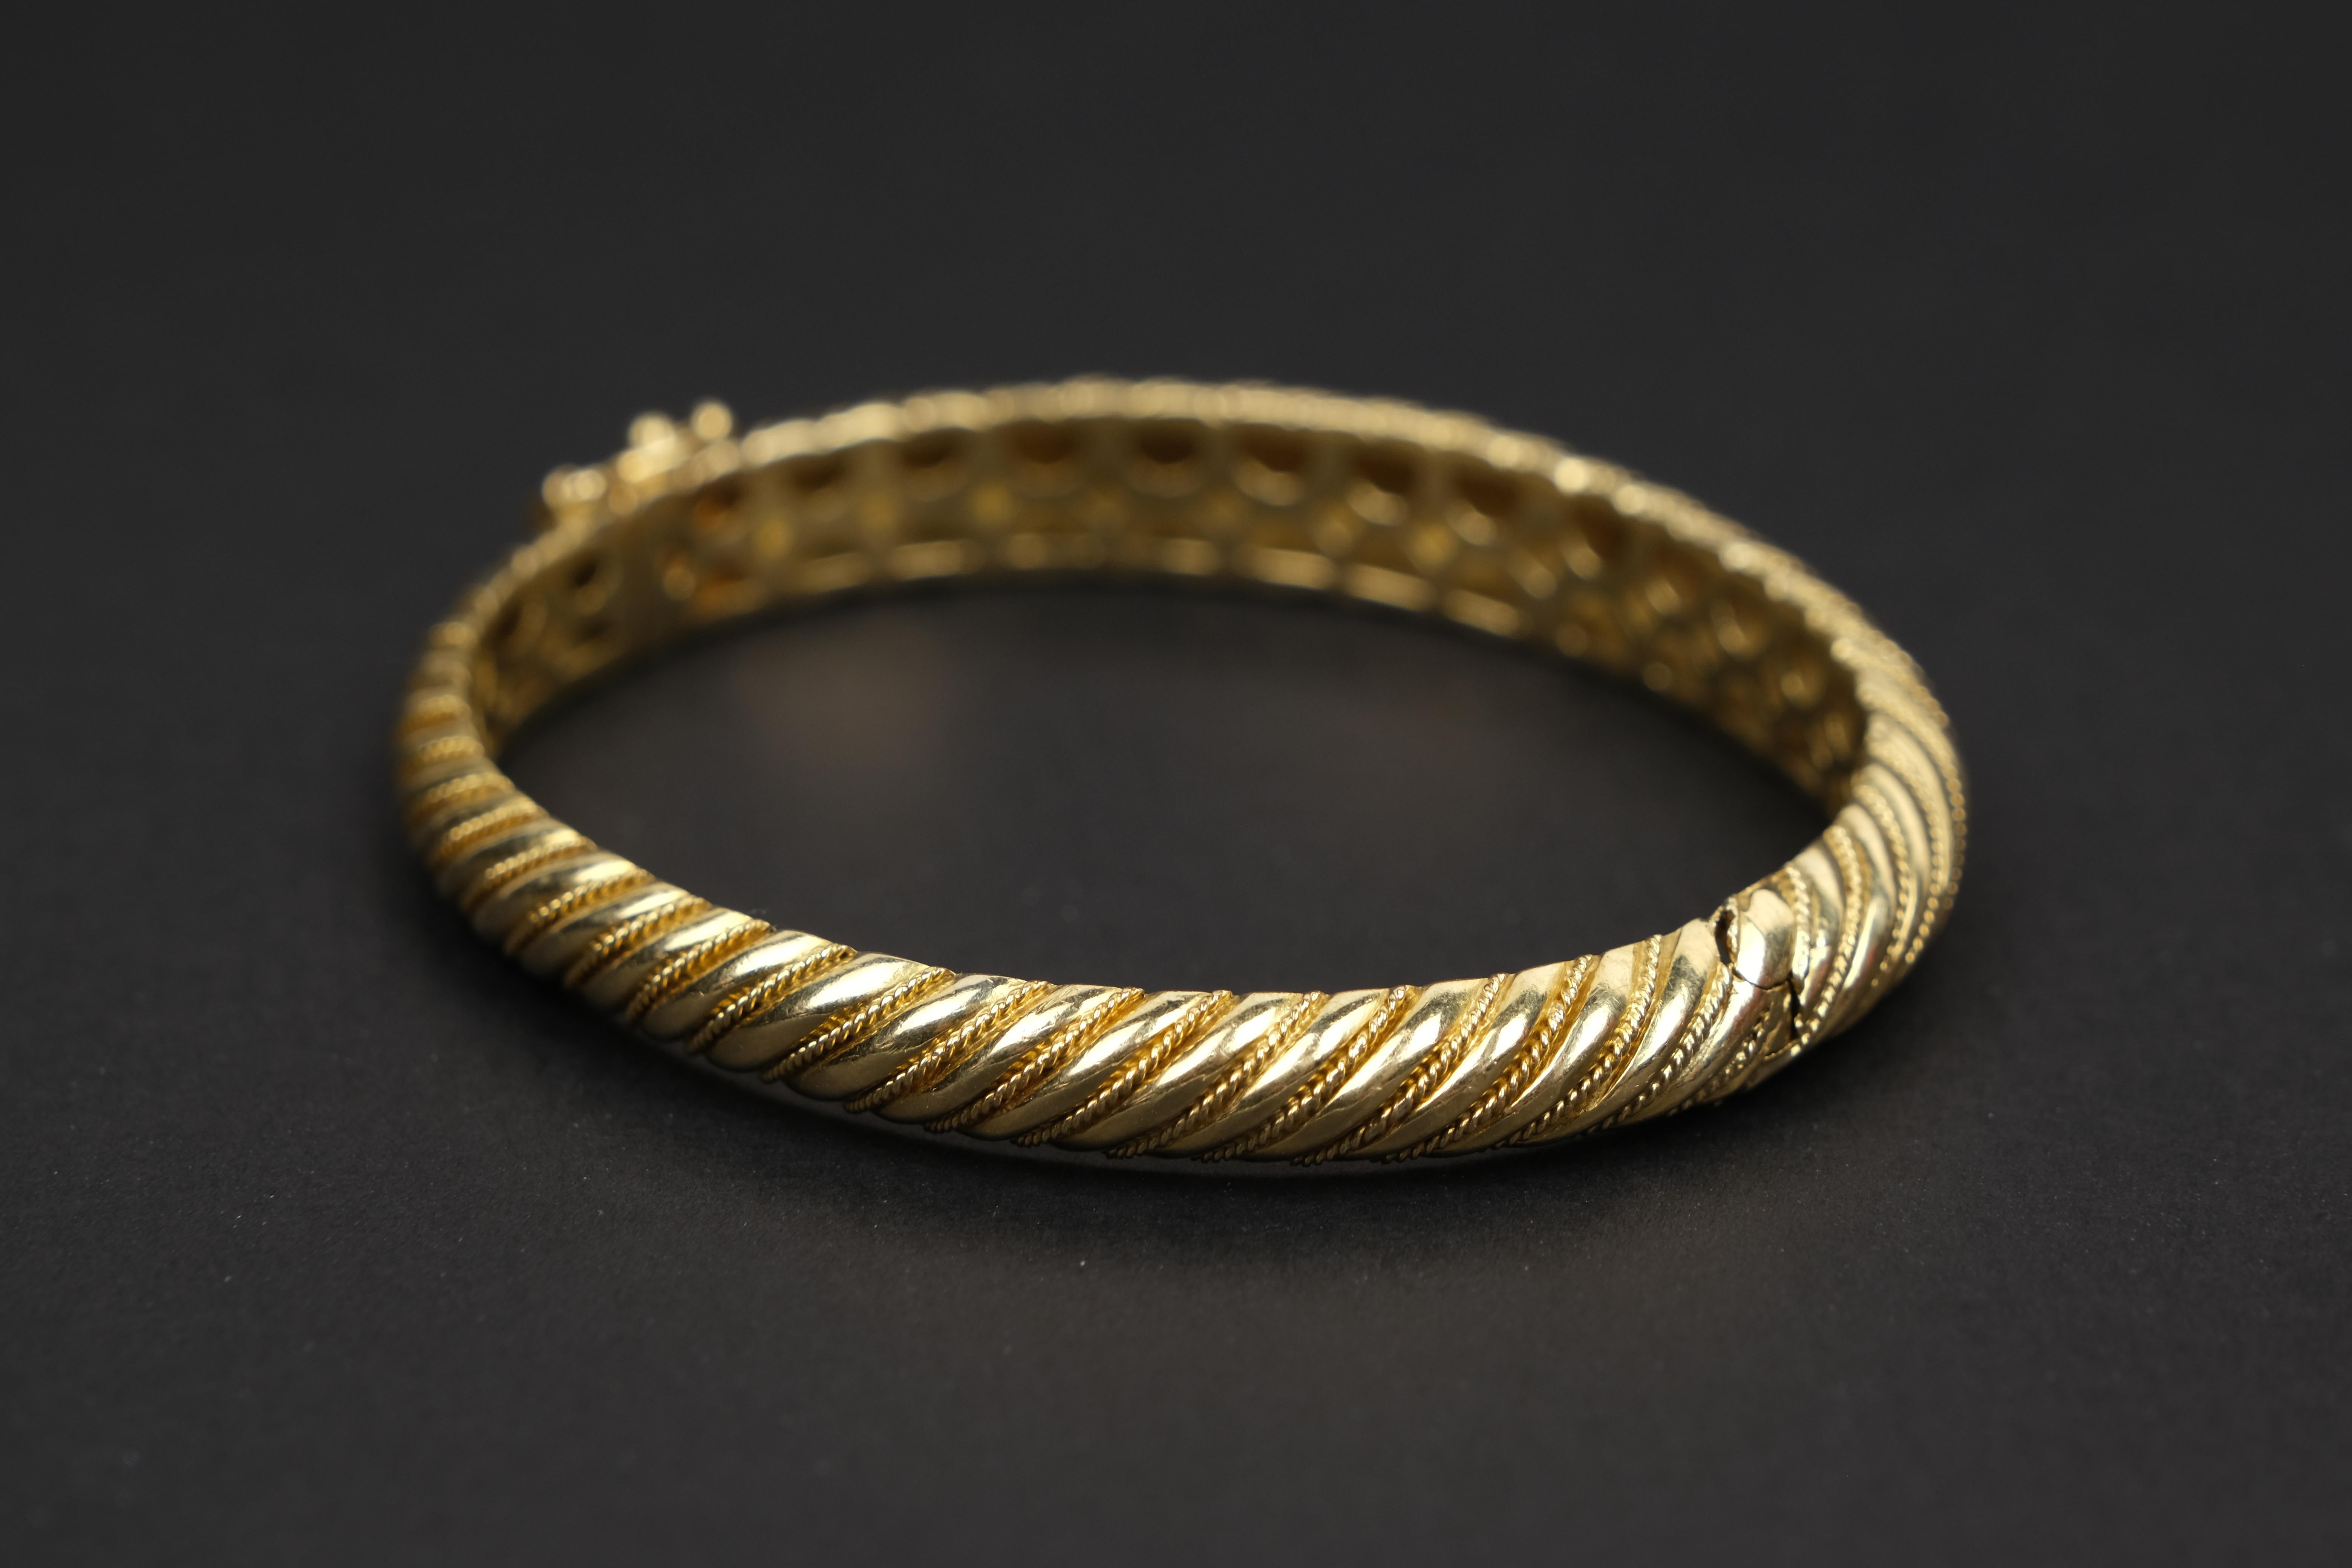 18 Karat Gold Torsade Bracelet- 30.5 grams of elegant 18kt.

Inner circumference: 6.5 Inches / 16.5 cm
Outer circumference: 8 inches / 20 cm
Diameter: 2.2 inches / 5.6 cm

I saw this at an estate auction and to be truthful the immediate attraction